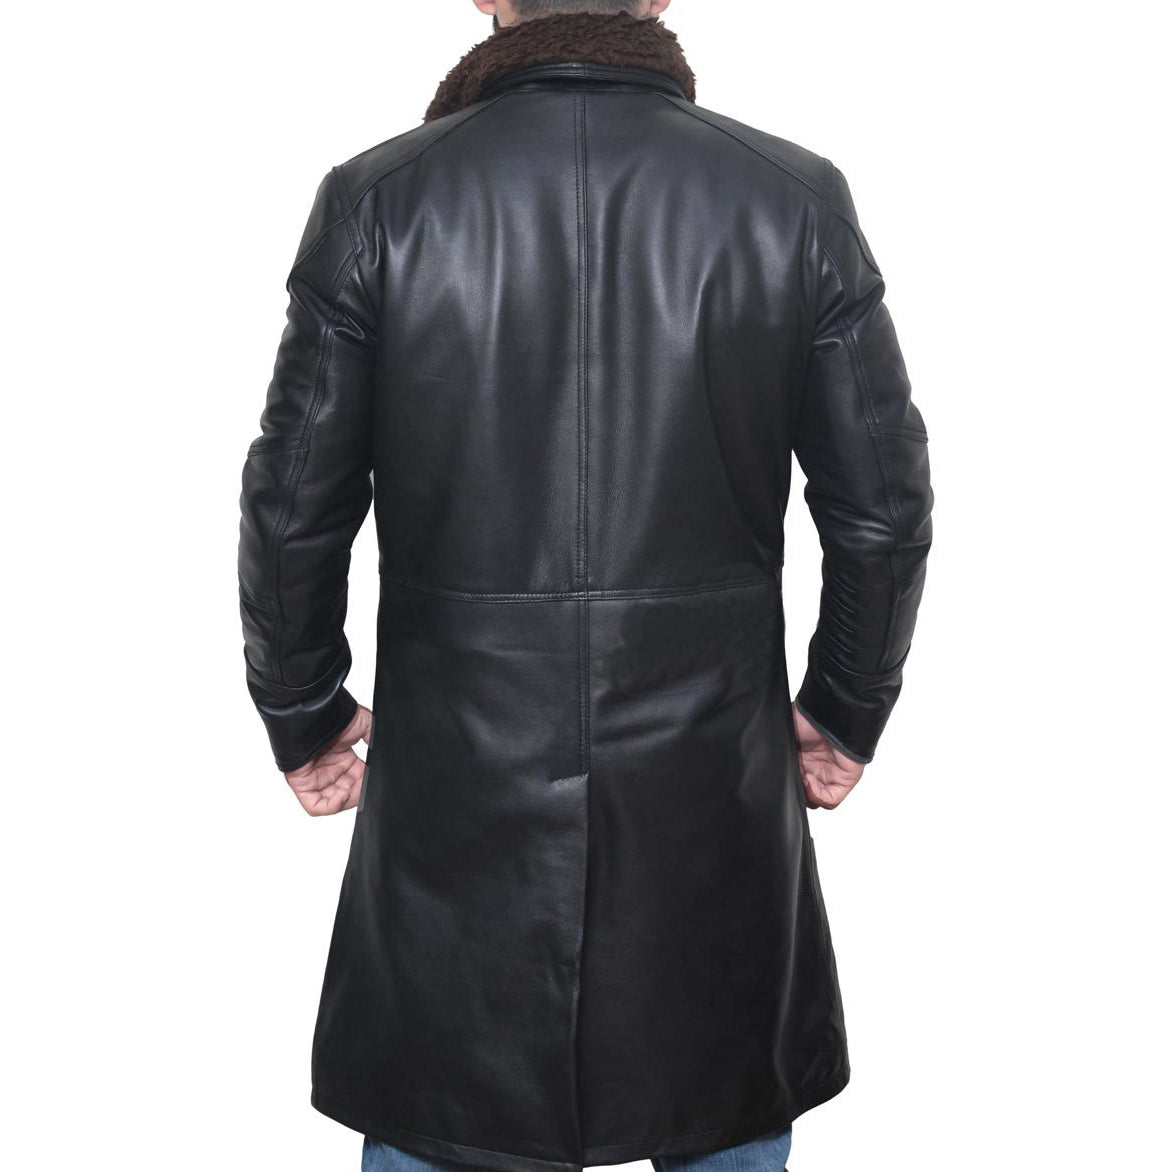 Mens Sherpa Black Trench Leather Coat